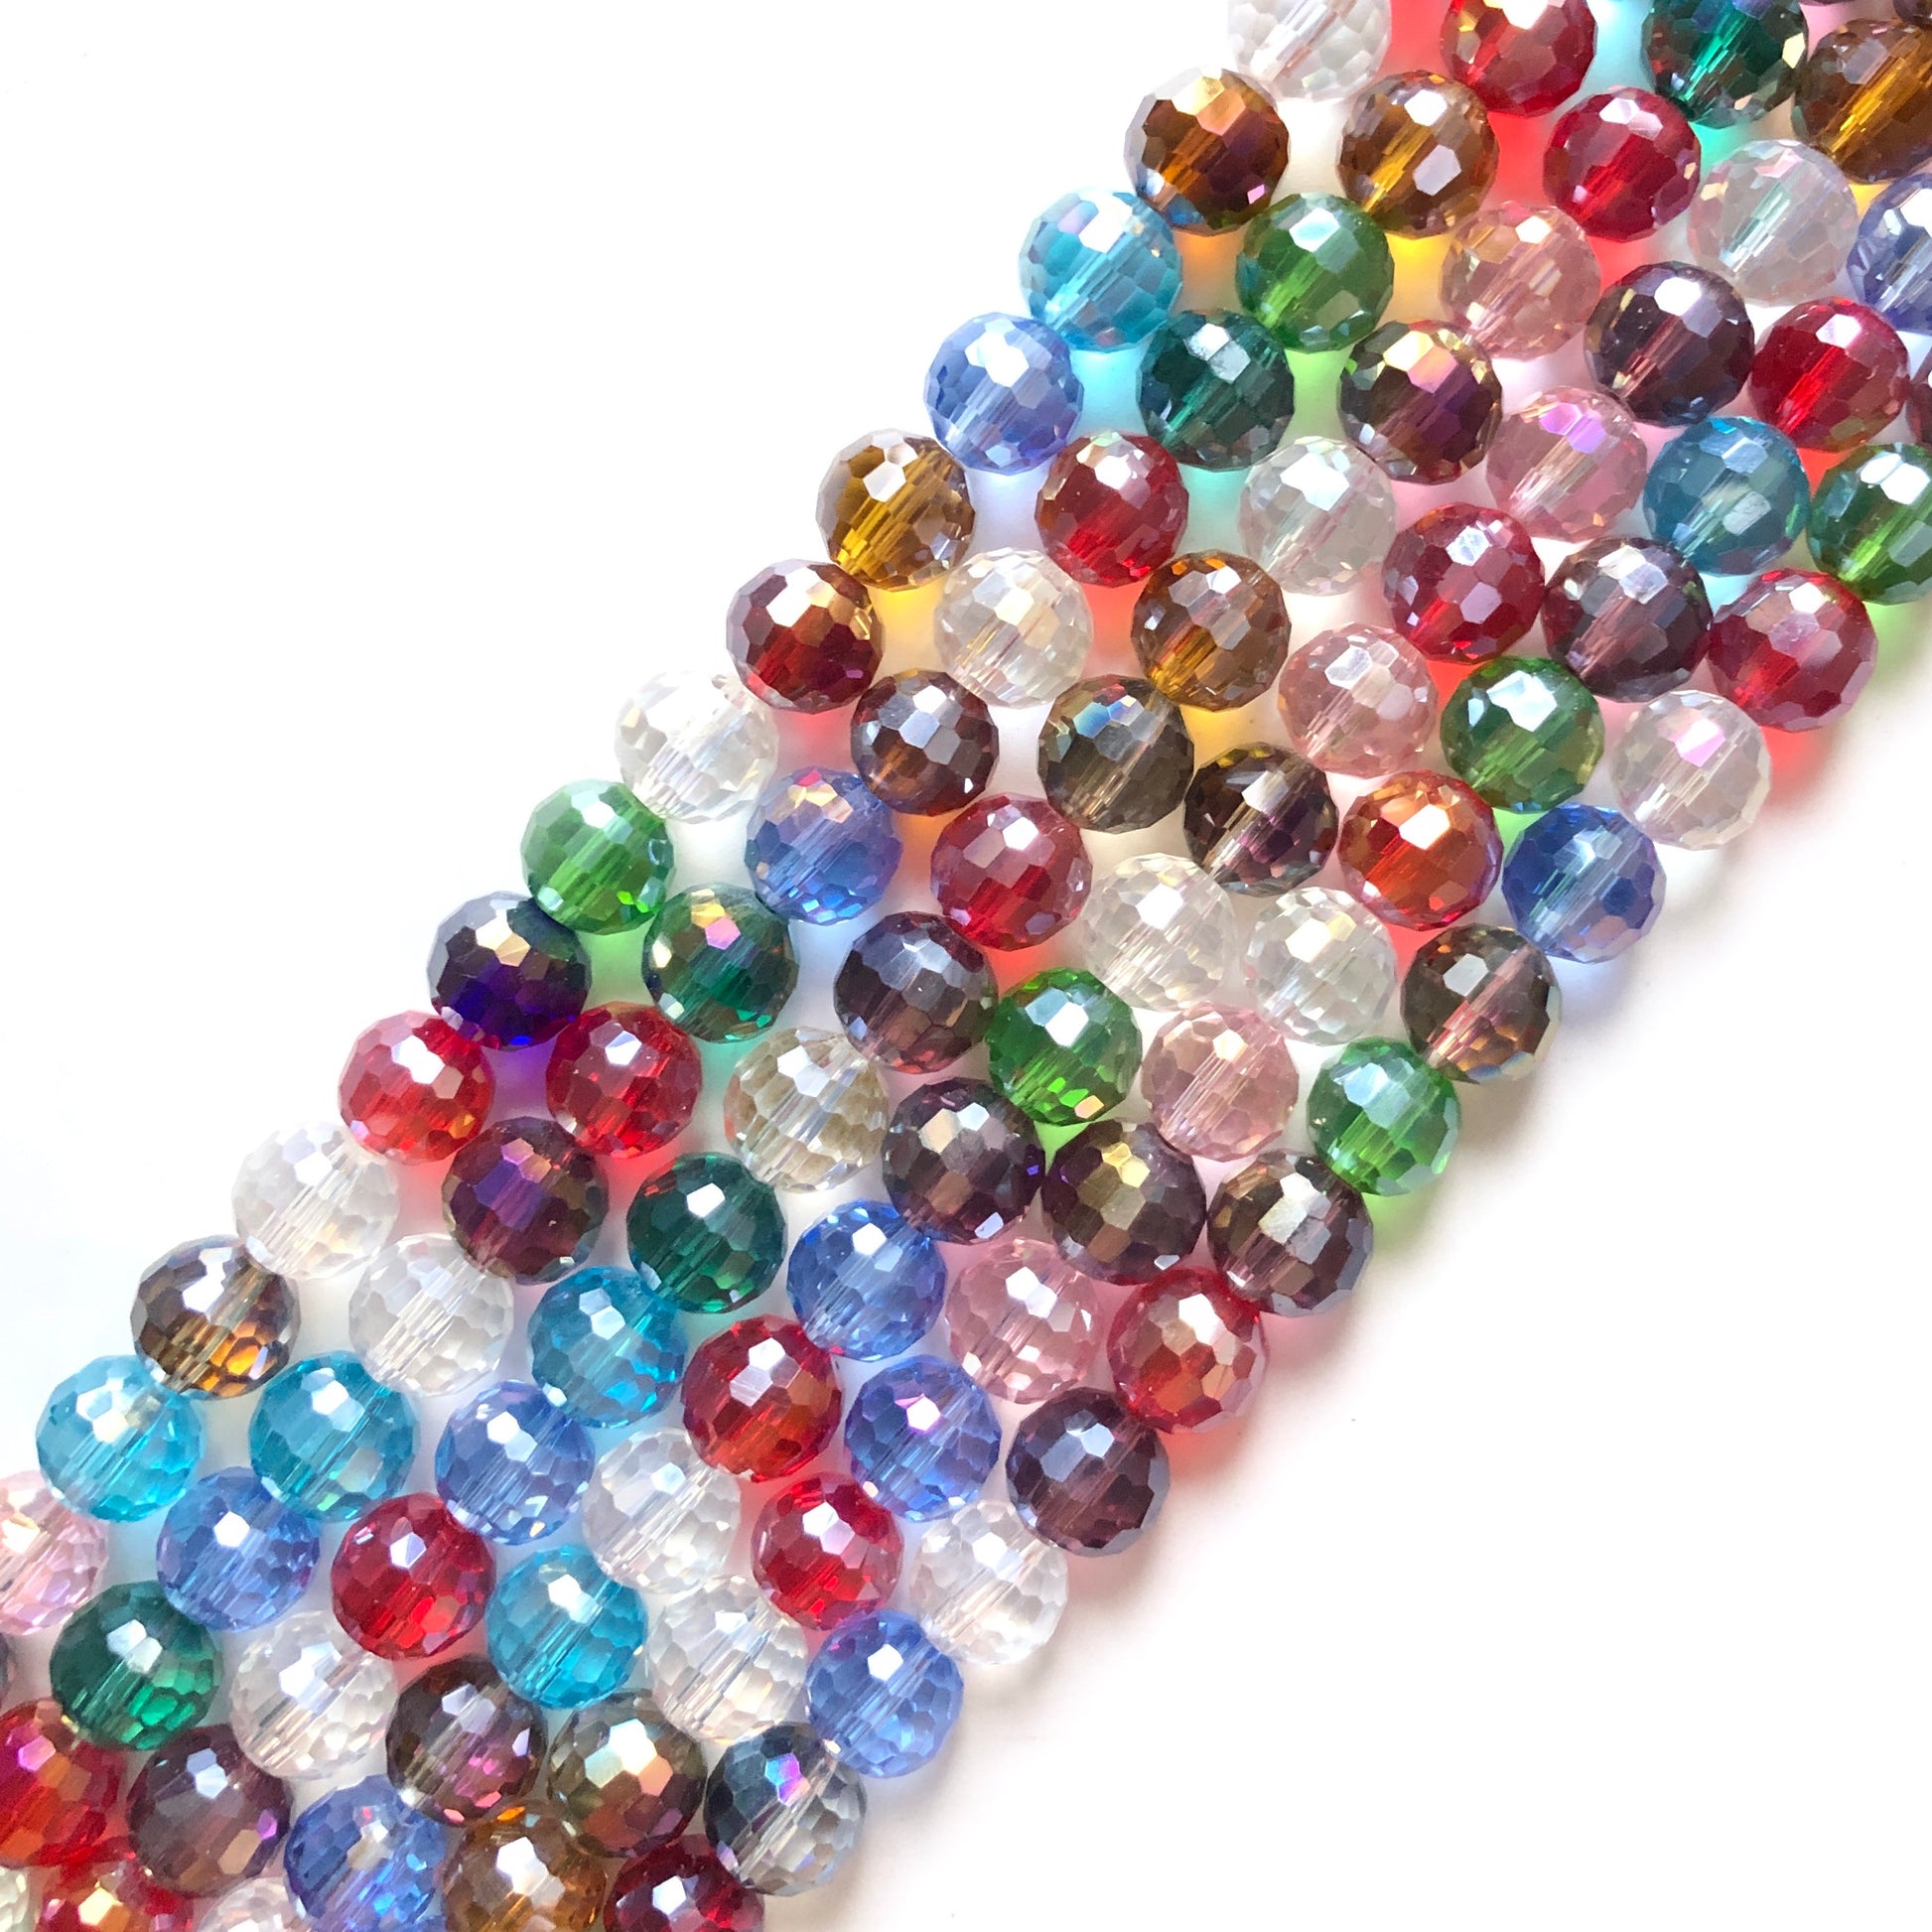 2 Strands/lot 10mm Multicolor 96 Faceted Glass Beads Glass Beads Faceted Glass Beads Charms Beads Beyond